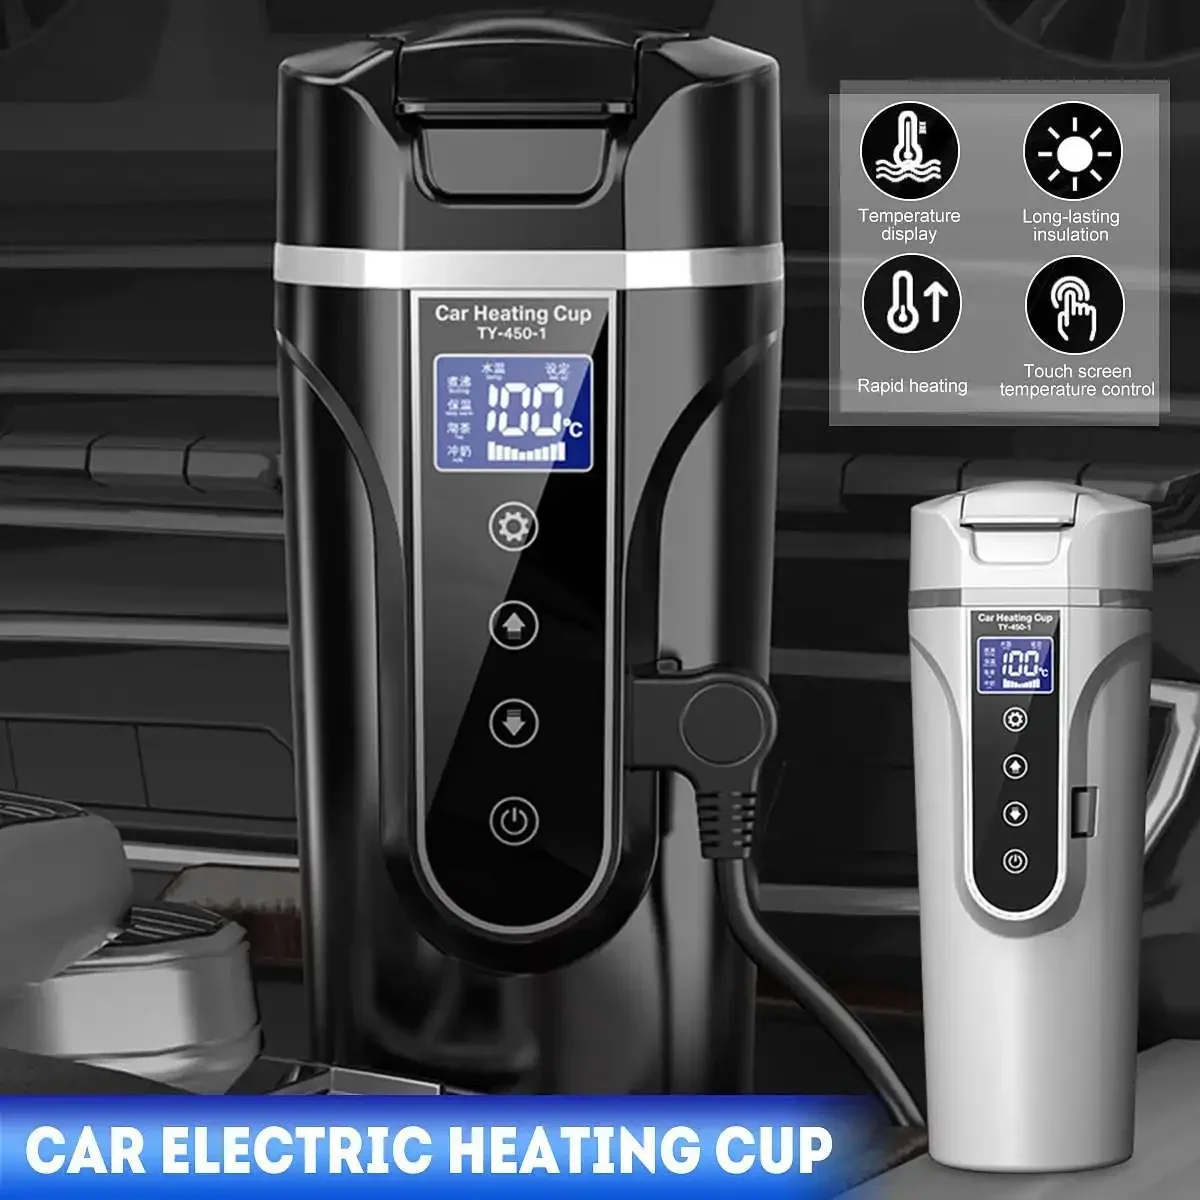 

12V / 24V 450ml Stainless Steel Car Heating Cup Electric Water Cup LCD Display Temperature Kettle Coffee Tea Milk Water Heated